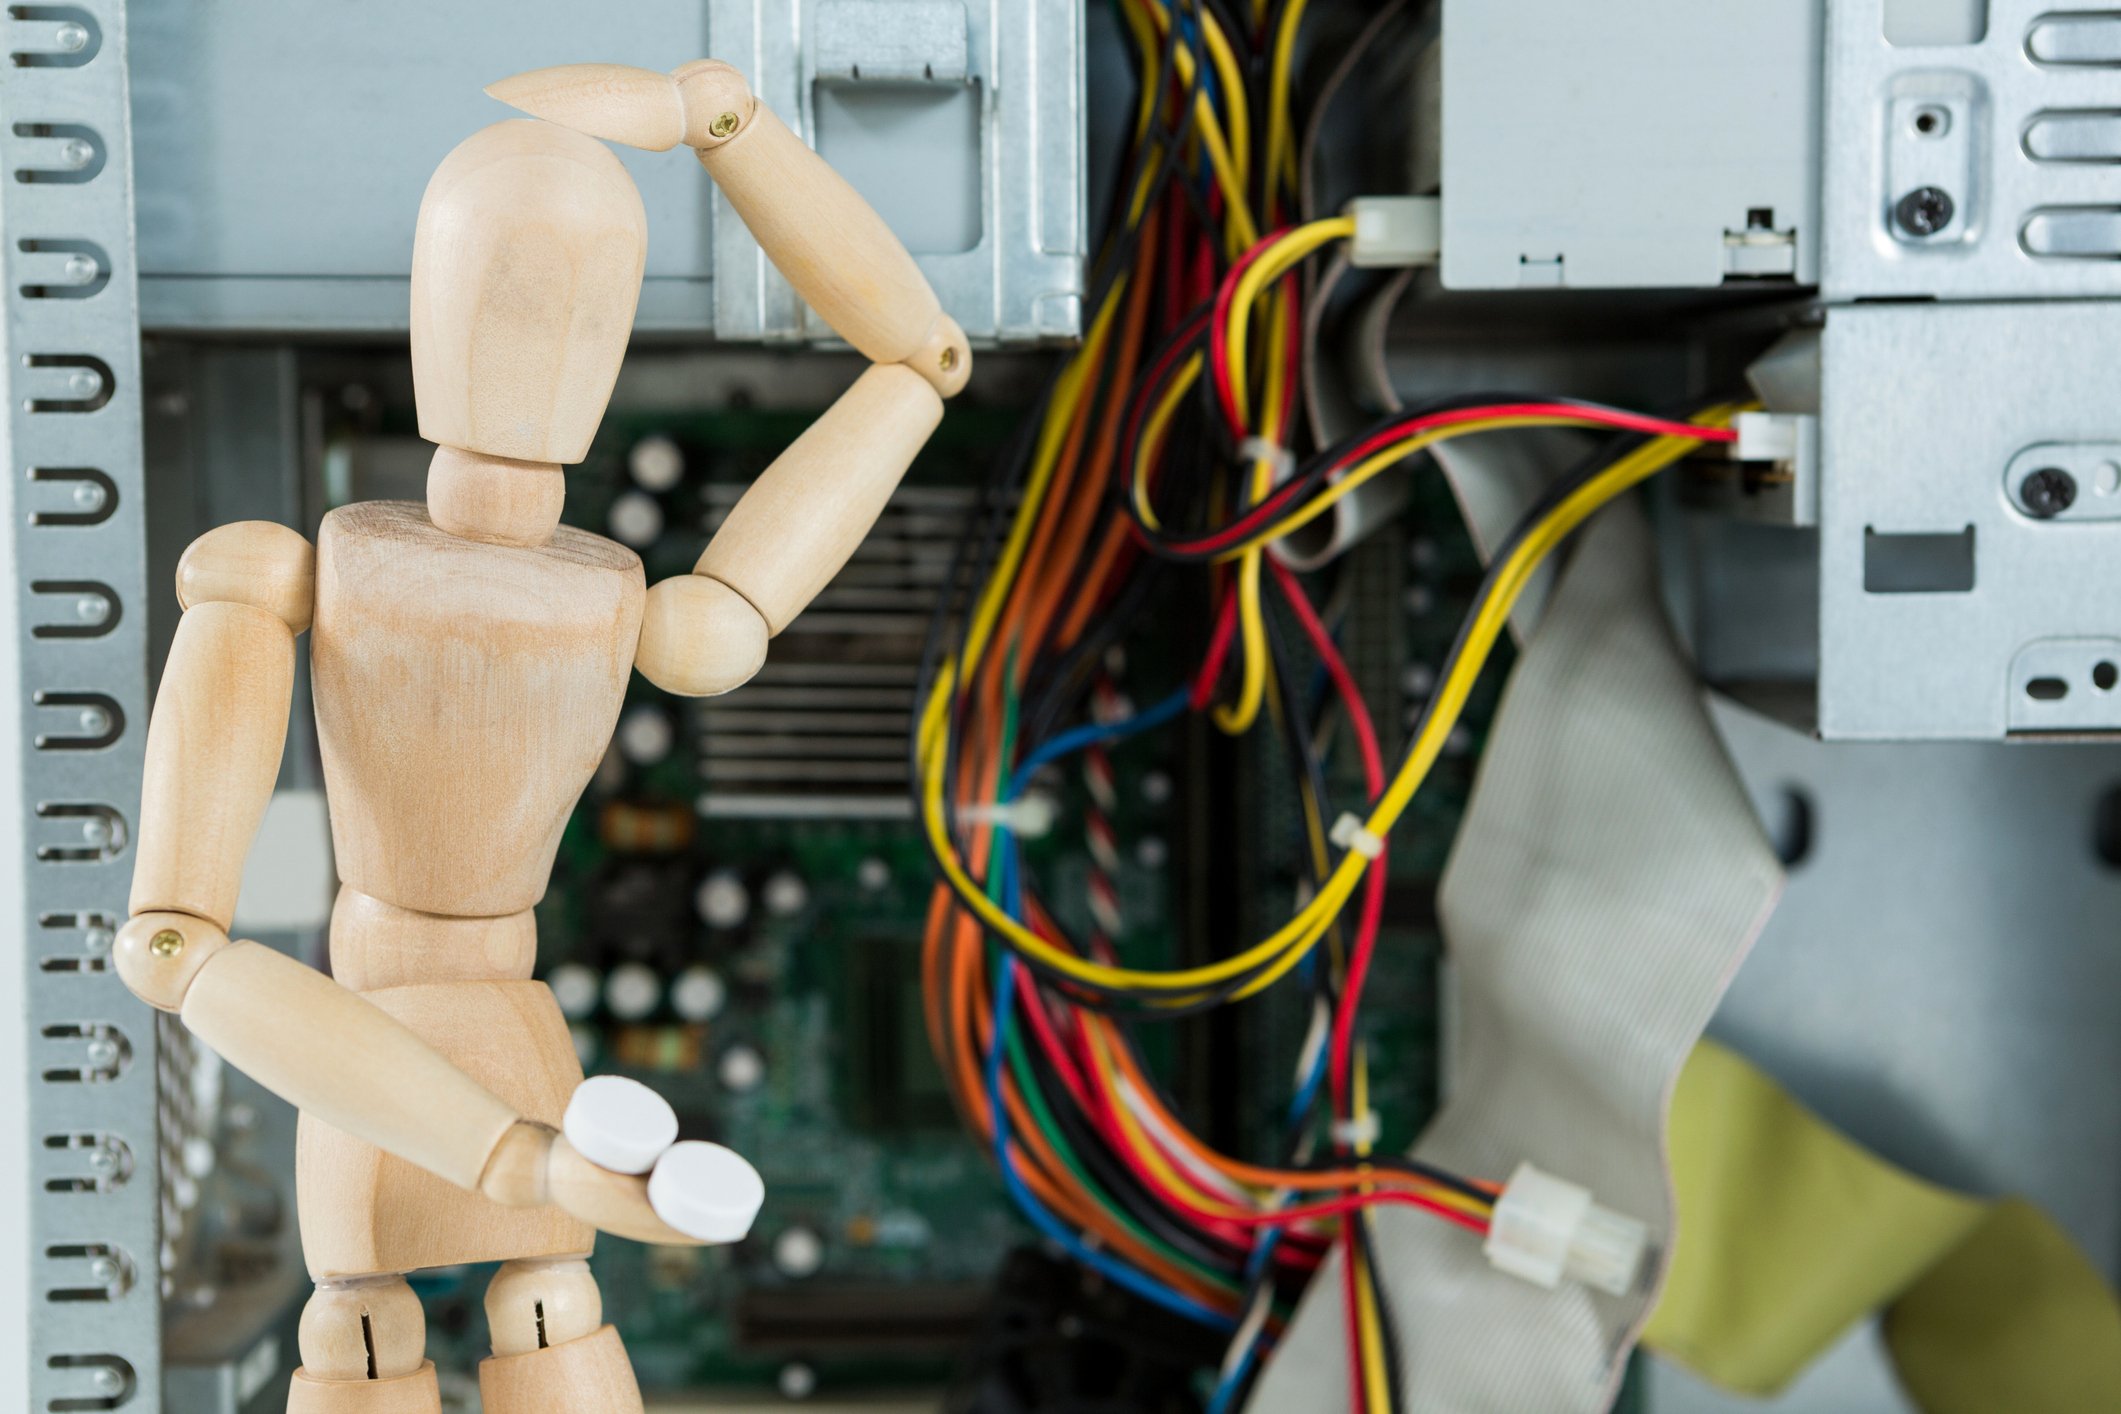 A toy human model posed scratching its head in front of IT wires.